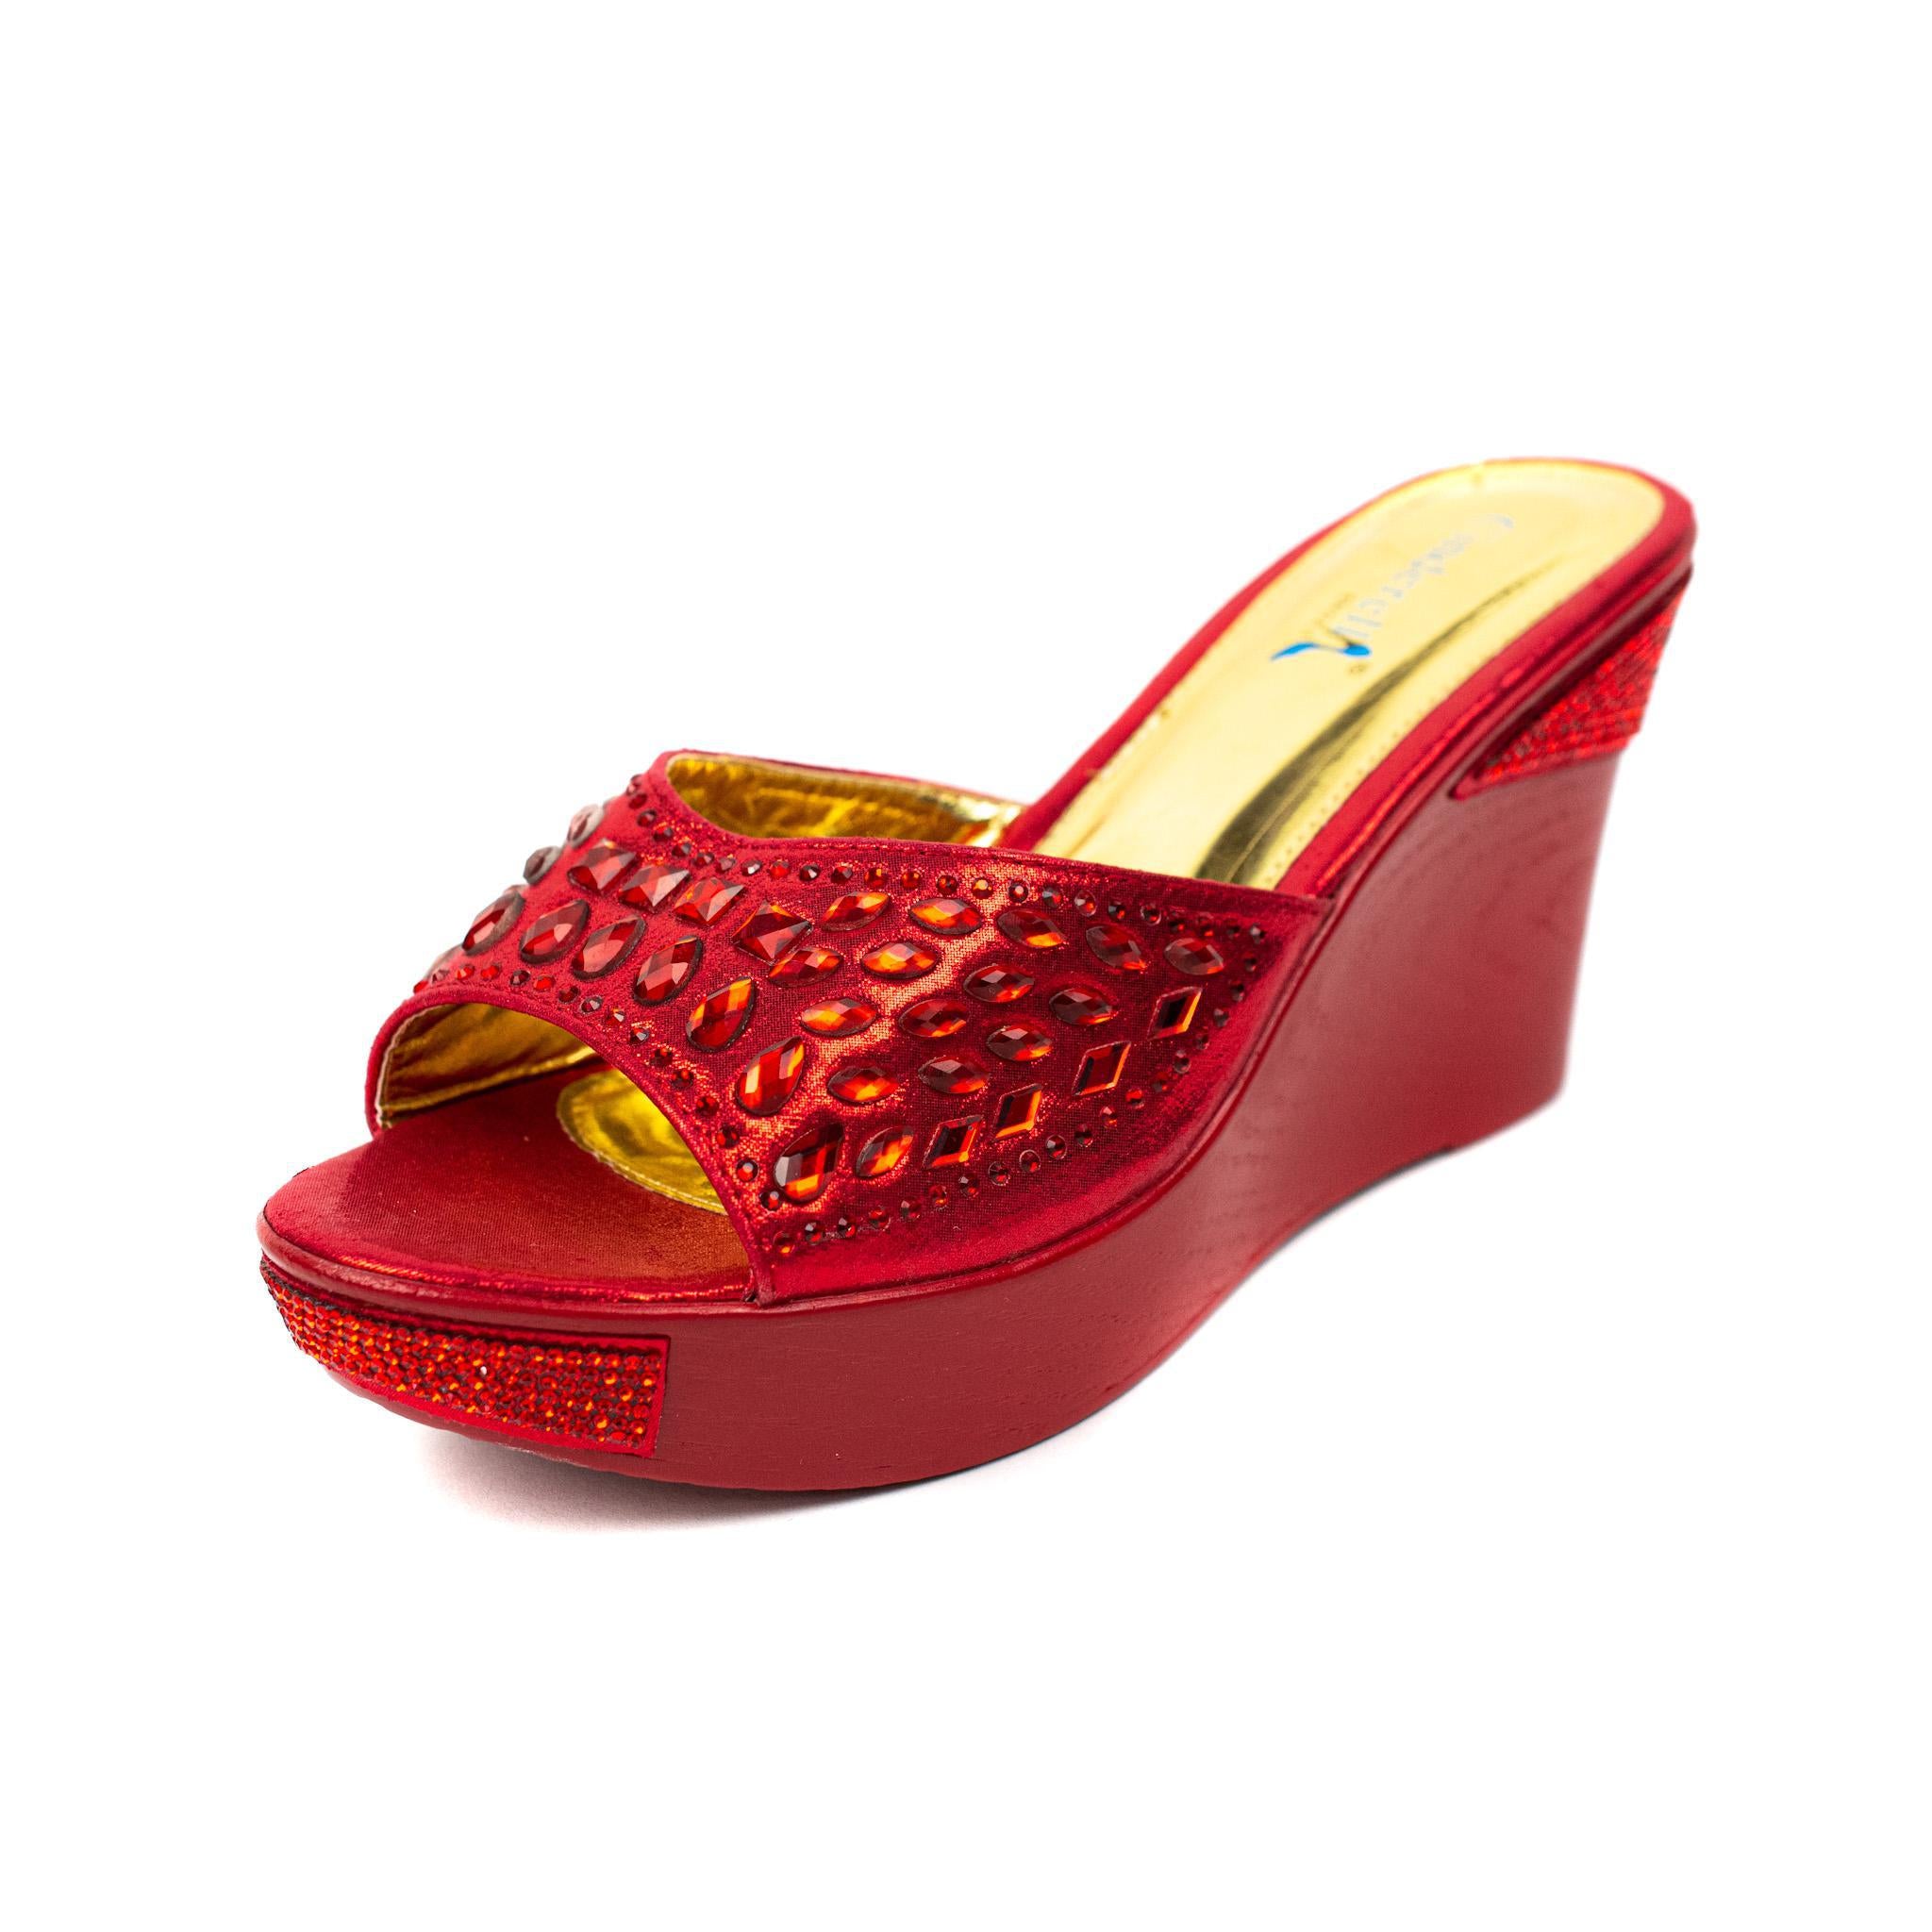 Red Wedge Sandal Slippers